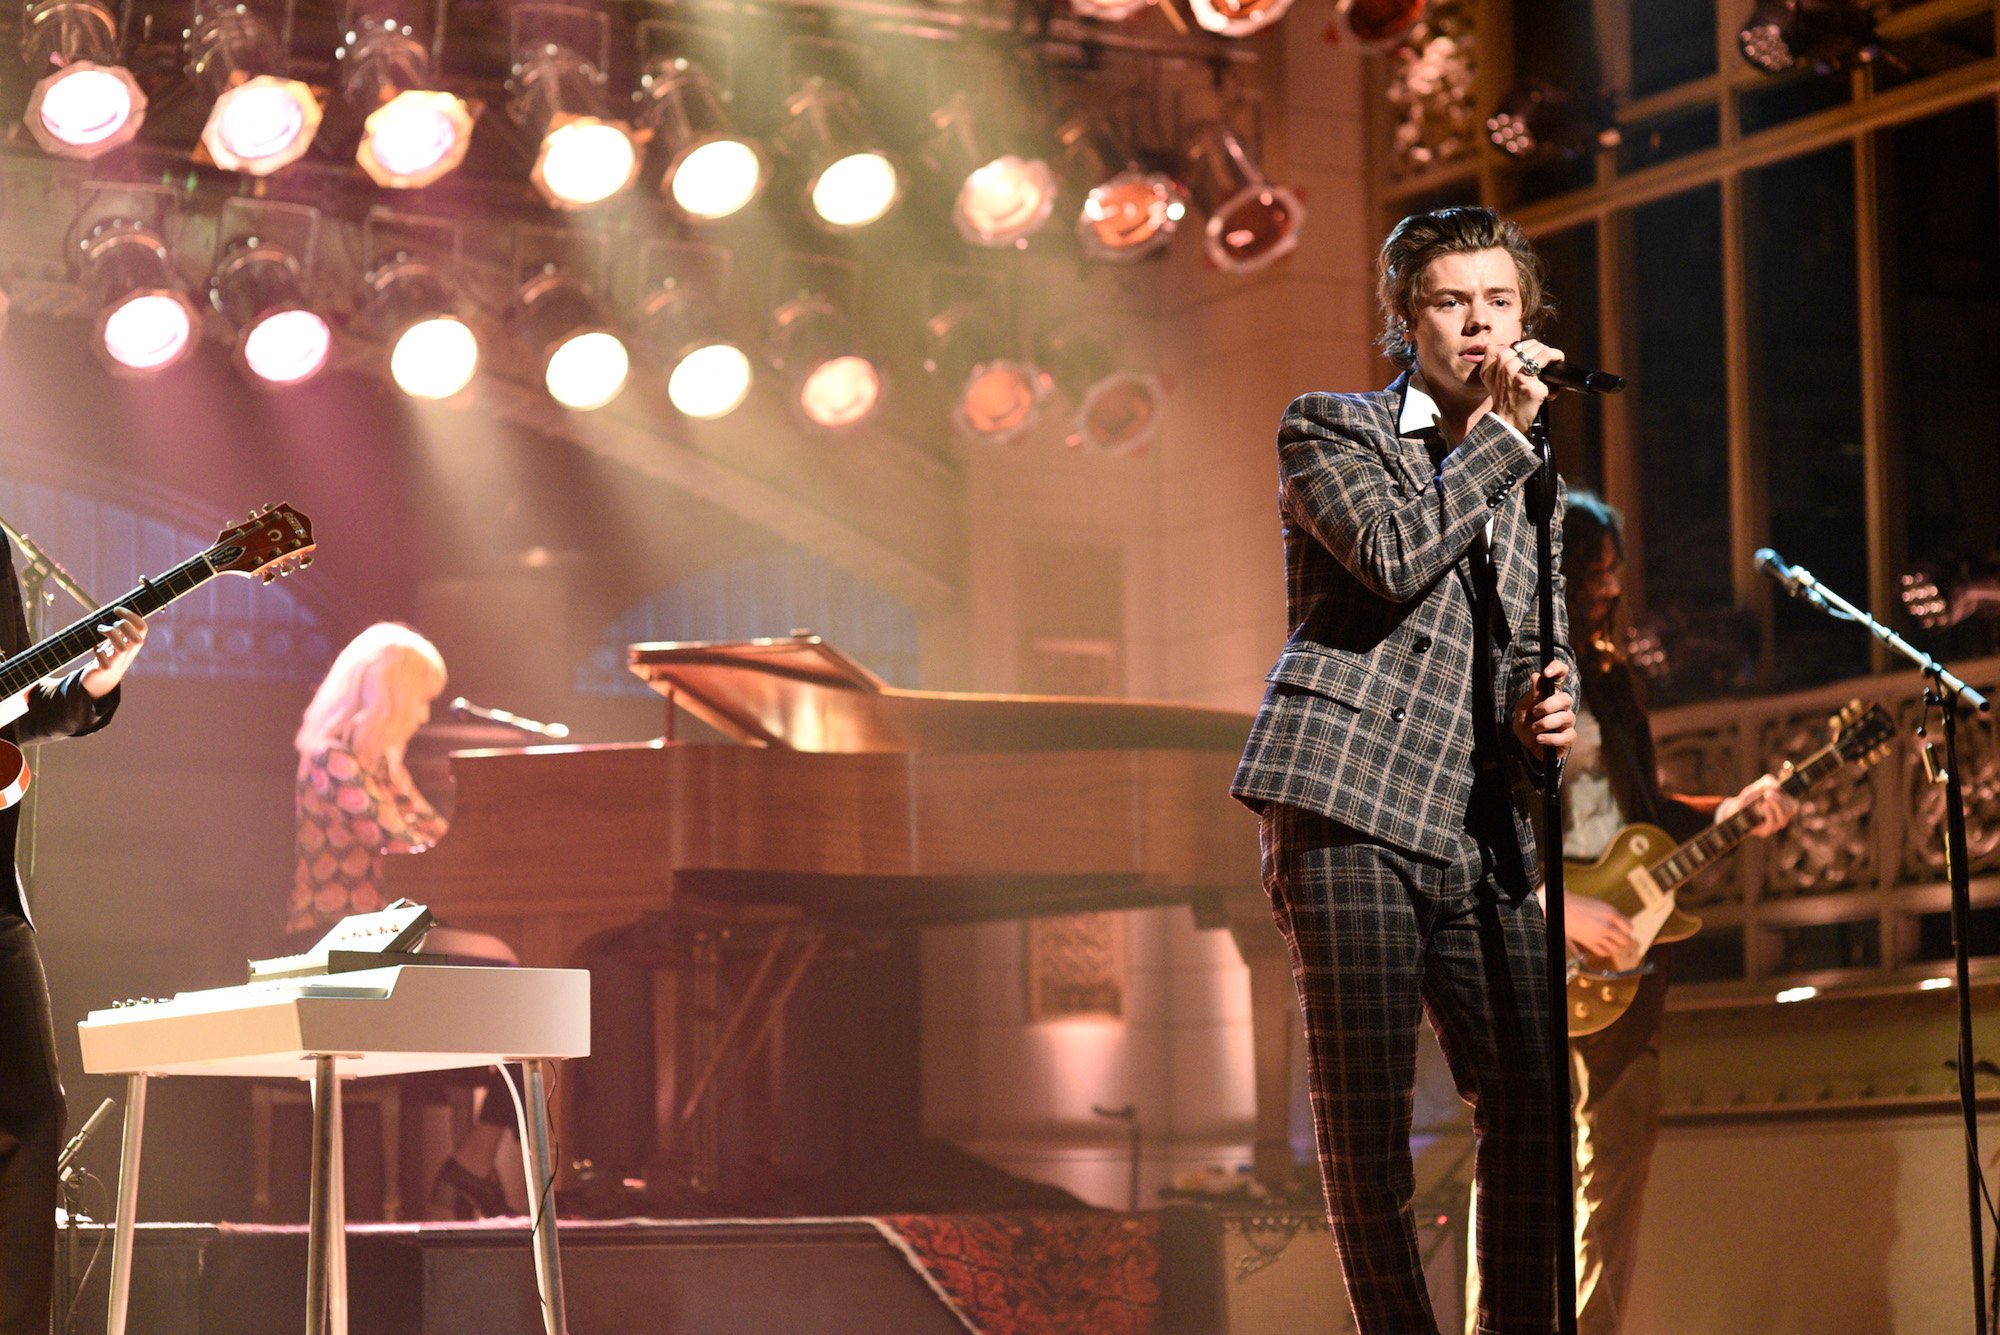 Harry Styles performed "Sign of the Times" on Jimmy Fallon's episode of 'Saturday Night Live' on April 15, 2017